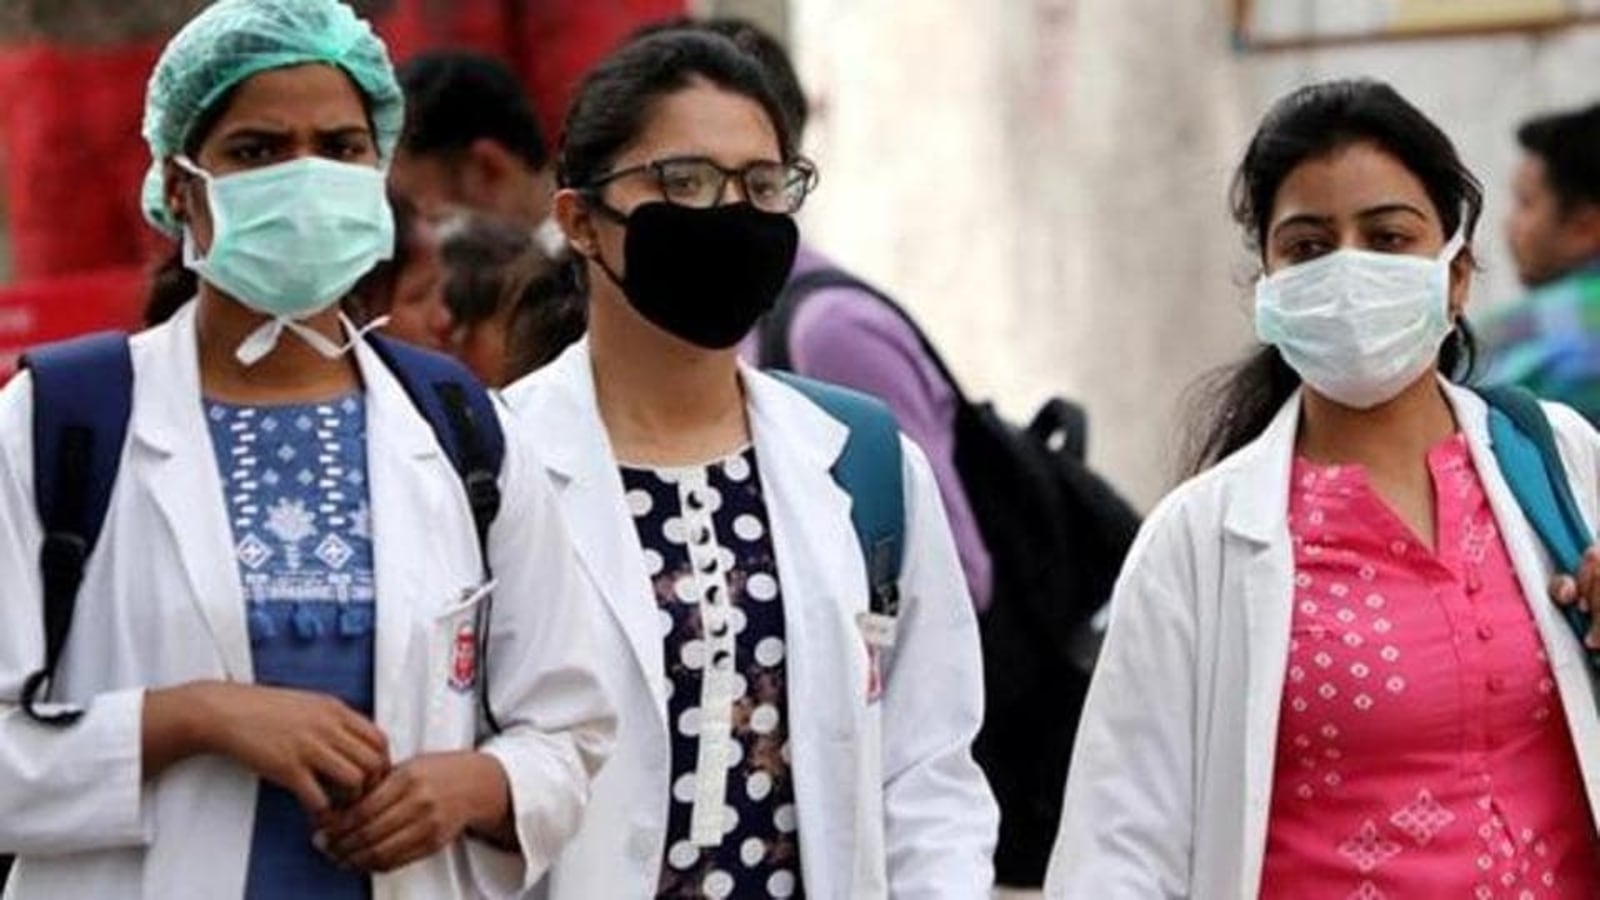 NeXT Exam: Centre proposes new board to hold medical entrance tests